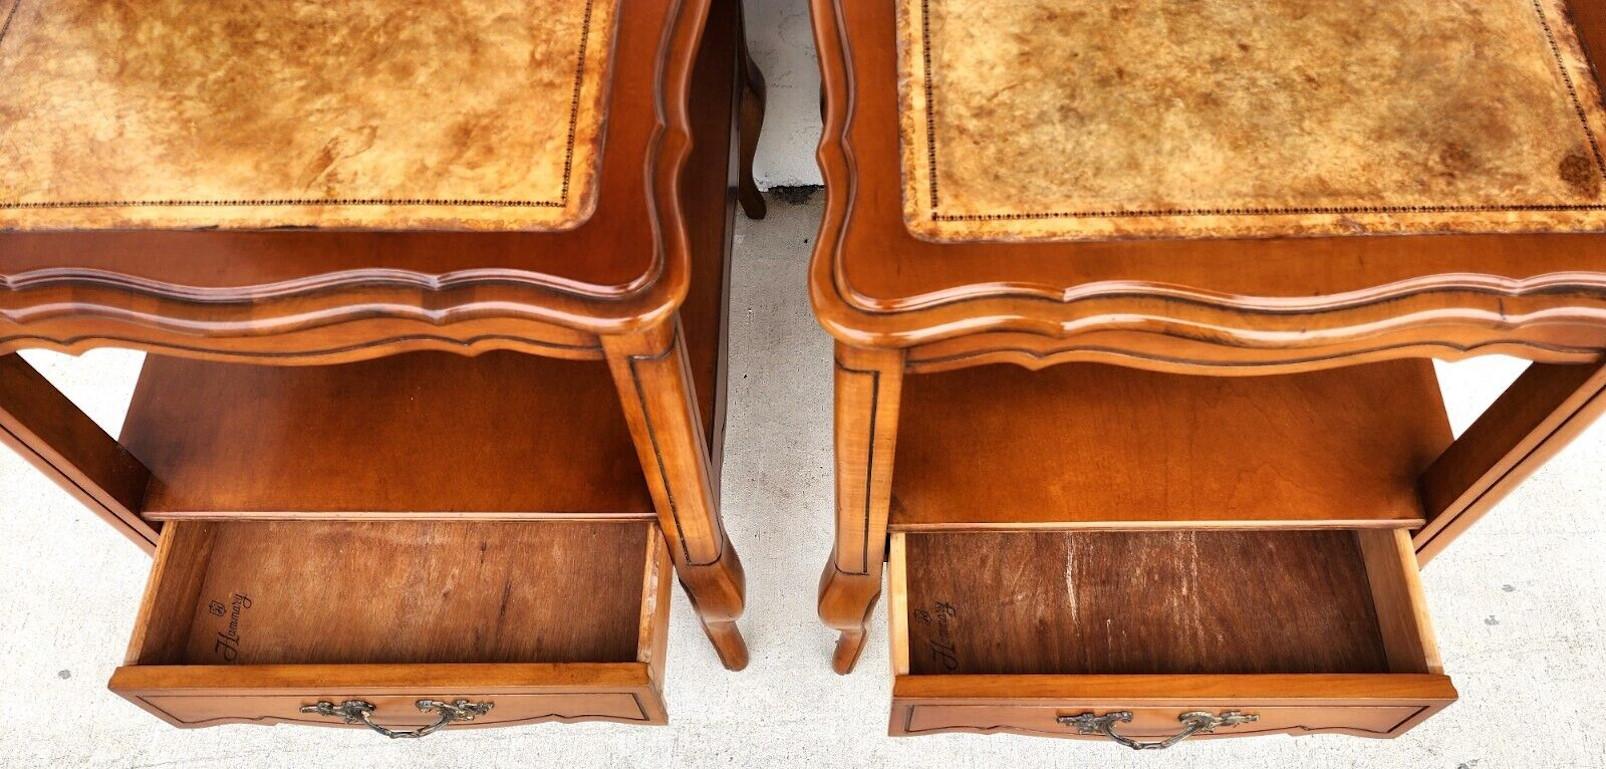 For FULL item description click on CONTINUE READING at the bottom of this page.

Offering One Of Our Recent Palm Beach Estate Fine Furniture Acquisitions Of A
Pair of Vintage French Provincial Side Tables Walnut Leather Top by HAMMARY

Approximate